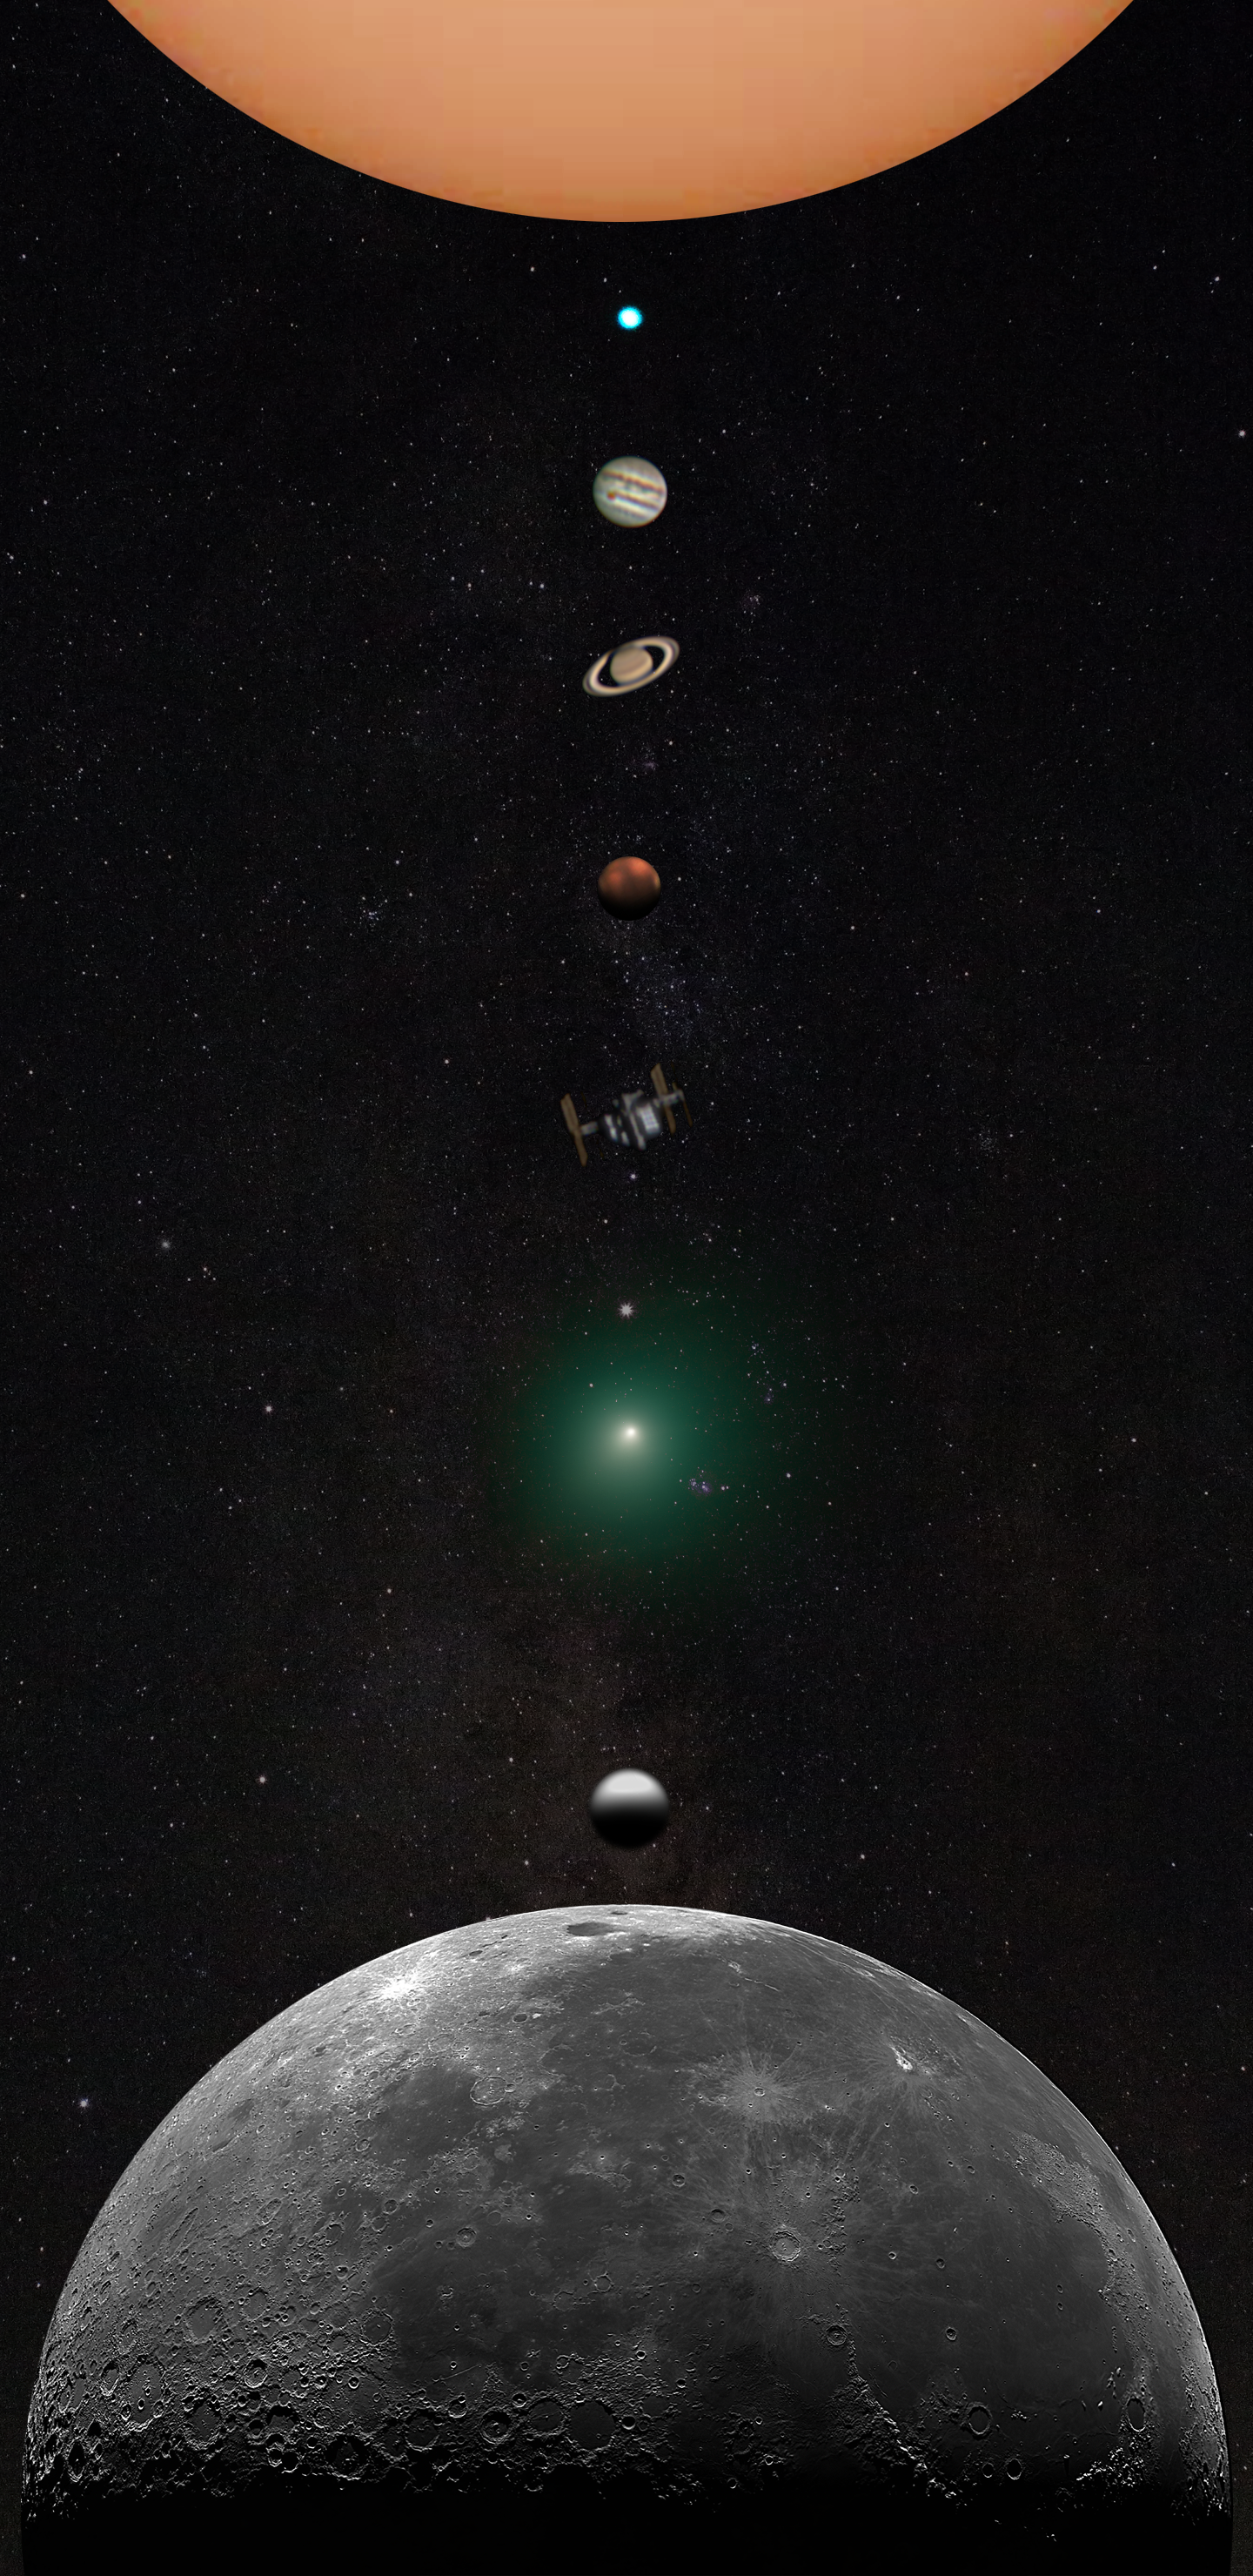 I made a phone wallpaper using every solar system object I photographed. iPhone X Wallpaper X Wallpaper HD